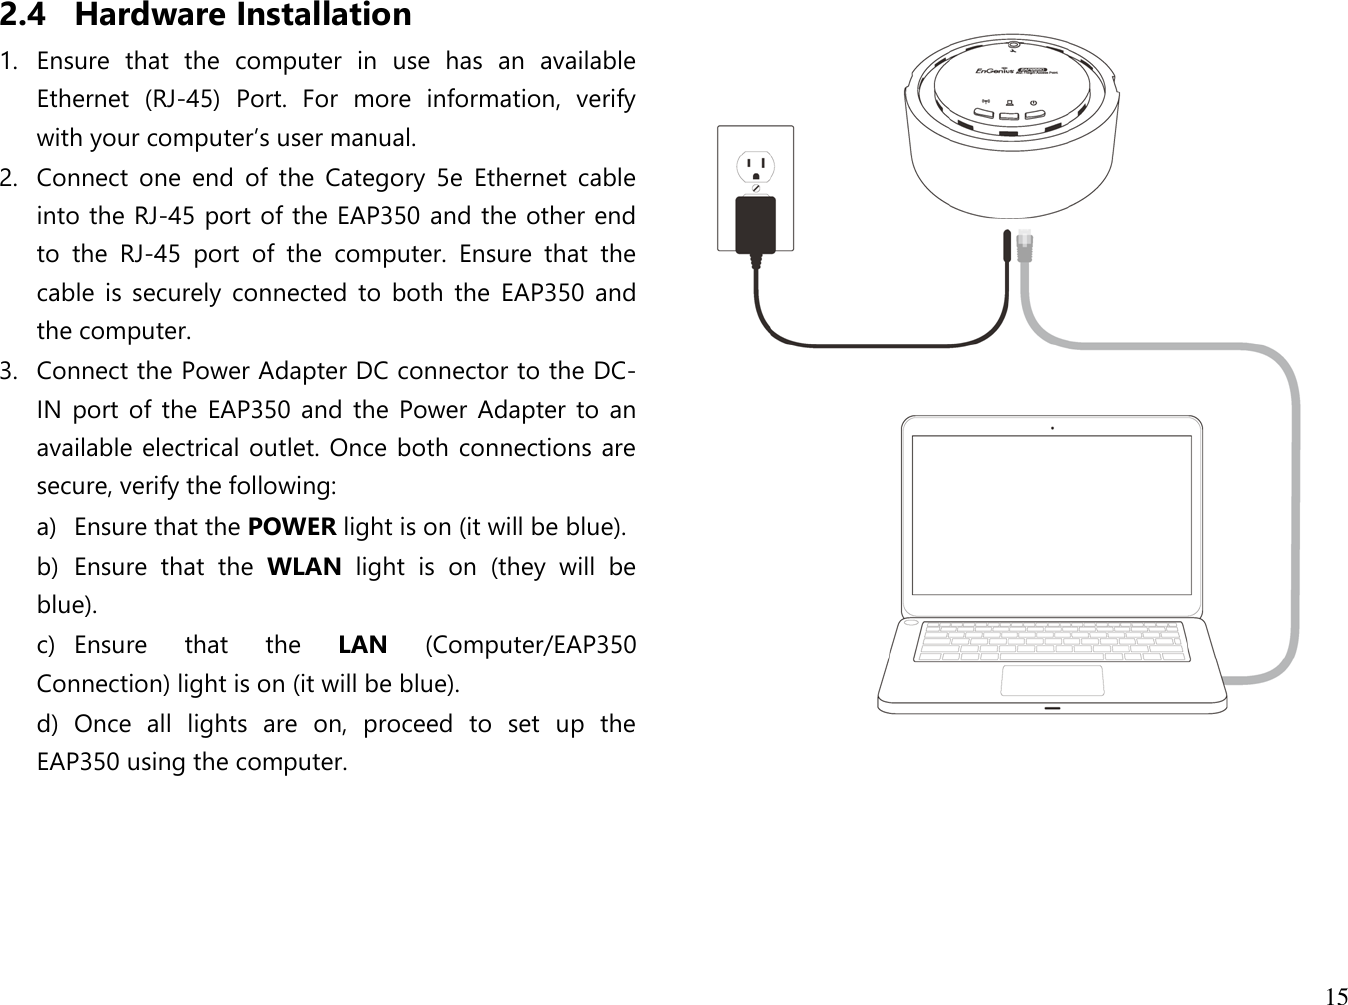 15  2.4 Hardware Installation 1. Ensure  that  the  computer  in  use  has  an  available Ethernet  (RJ-45)  Port.  For  more  information,  verify with your computer’s user manual. 2. Connect  one  end  of  the  Category  5e  Ethernet  cable into the RJ-45 port of the EAP350 and the other end to  the  RJ-45  port  of  the  computer.  Ensure  that  the cable  is  securely connected  to  both  the  EAP350  and the computer. 3. Connect the Power Adapter DC connector to the DC-IN  port of  the EAP350 and  the Power  Adapter to an available electrical outlet. Once both connections are secure, verify the following: a)  Ensure that the POWER light is on (it will be blue). b)  Ensure  that  the  WLAN  light  is  on  (they  will  be blue). c)  Ensure  that  the  LAN  (Computer/EAP350 Connection) light is on (it will be blue). d)  Once  all  lights  are  on,  proceed  to  set  up  the EAP350 using the computer.             